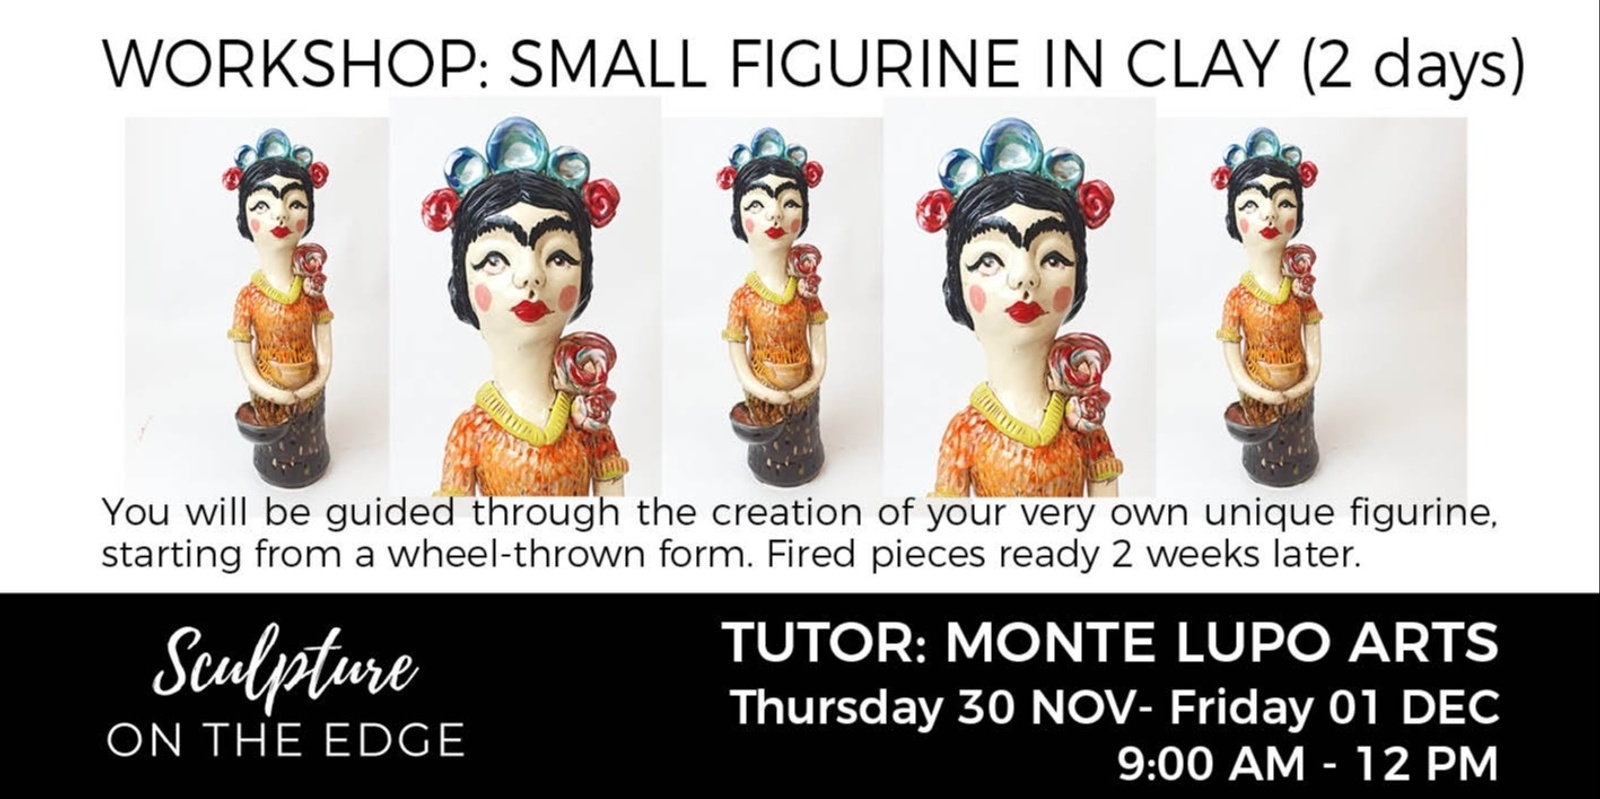 Banner image for Workshop: Small Figurine in Clay by Monte Lupo Arts (2 days)